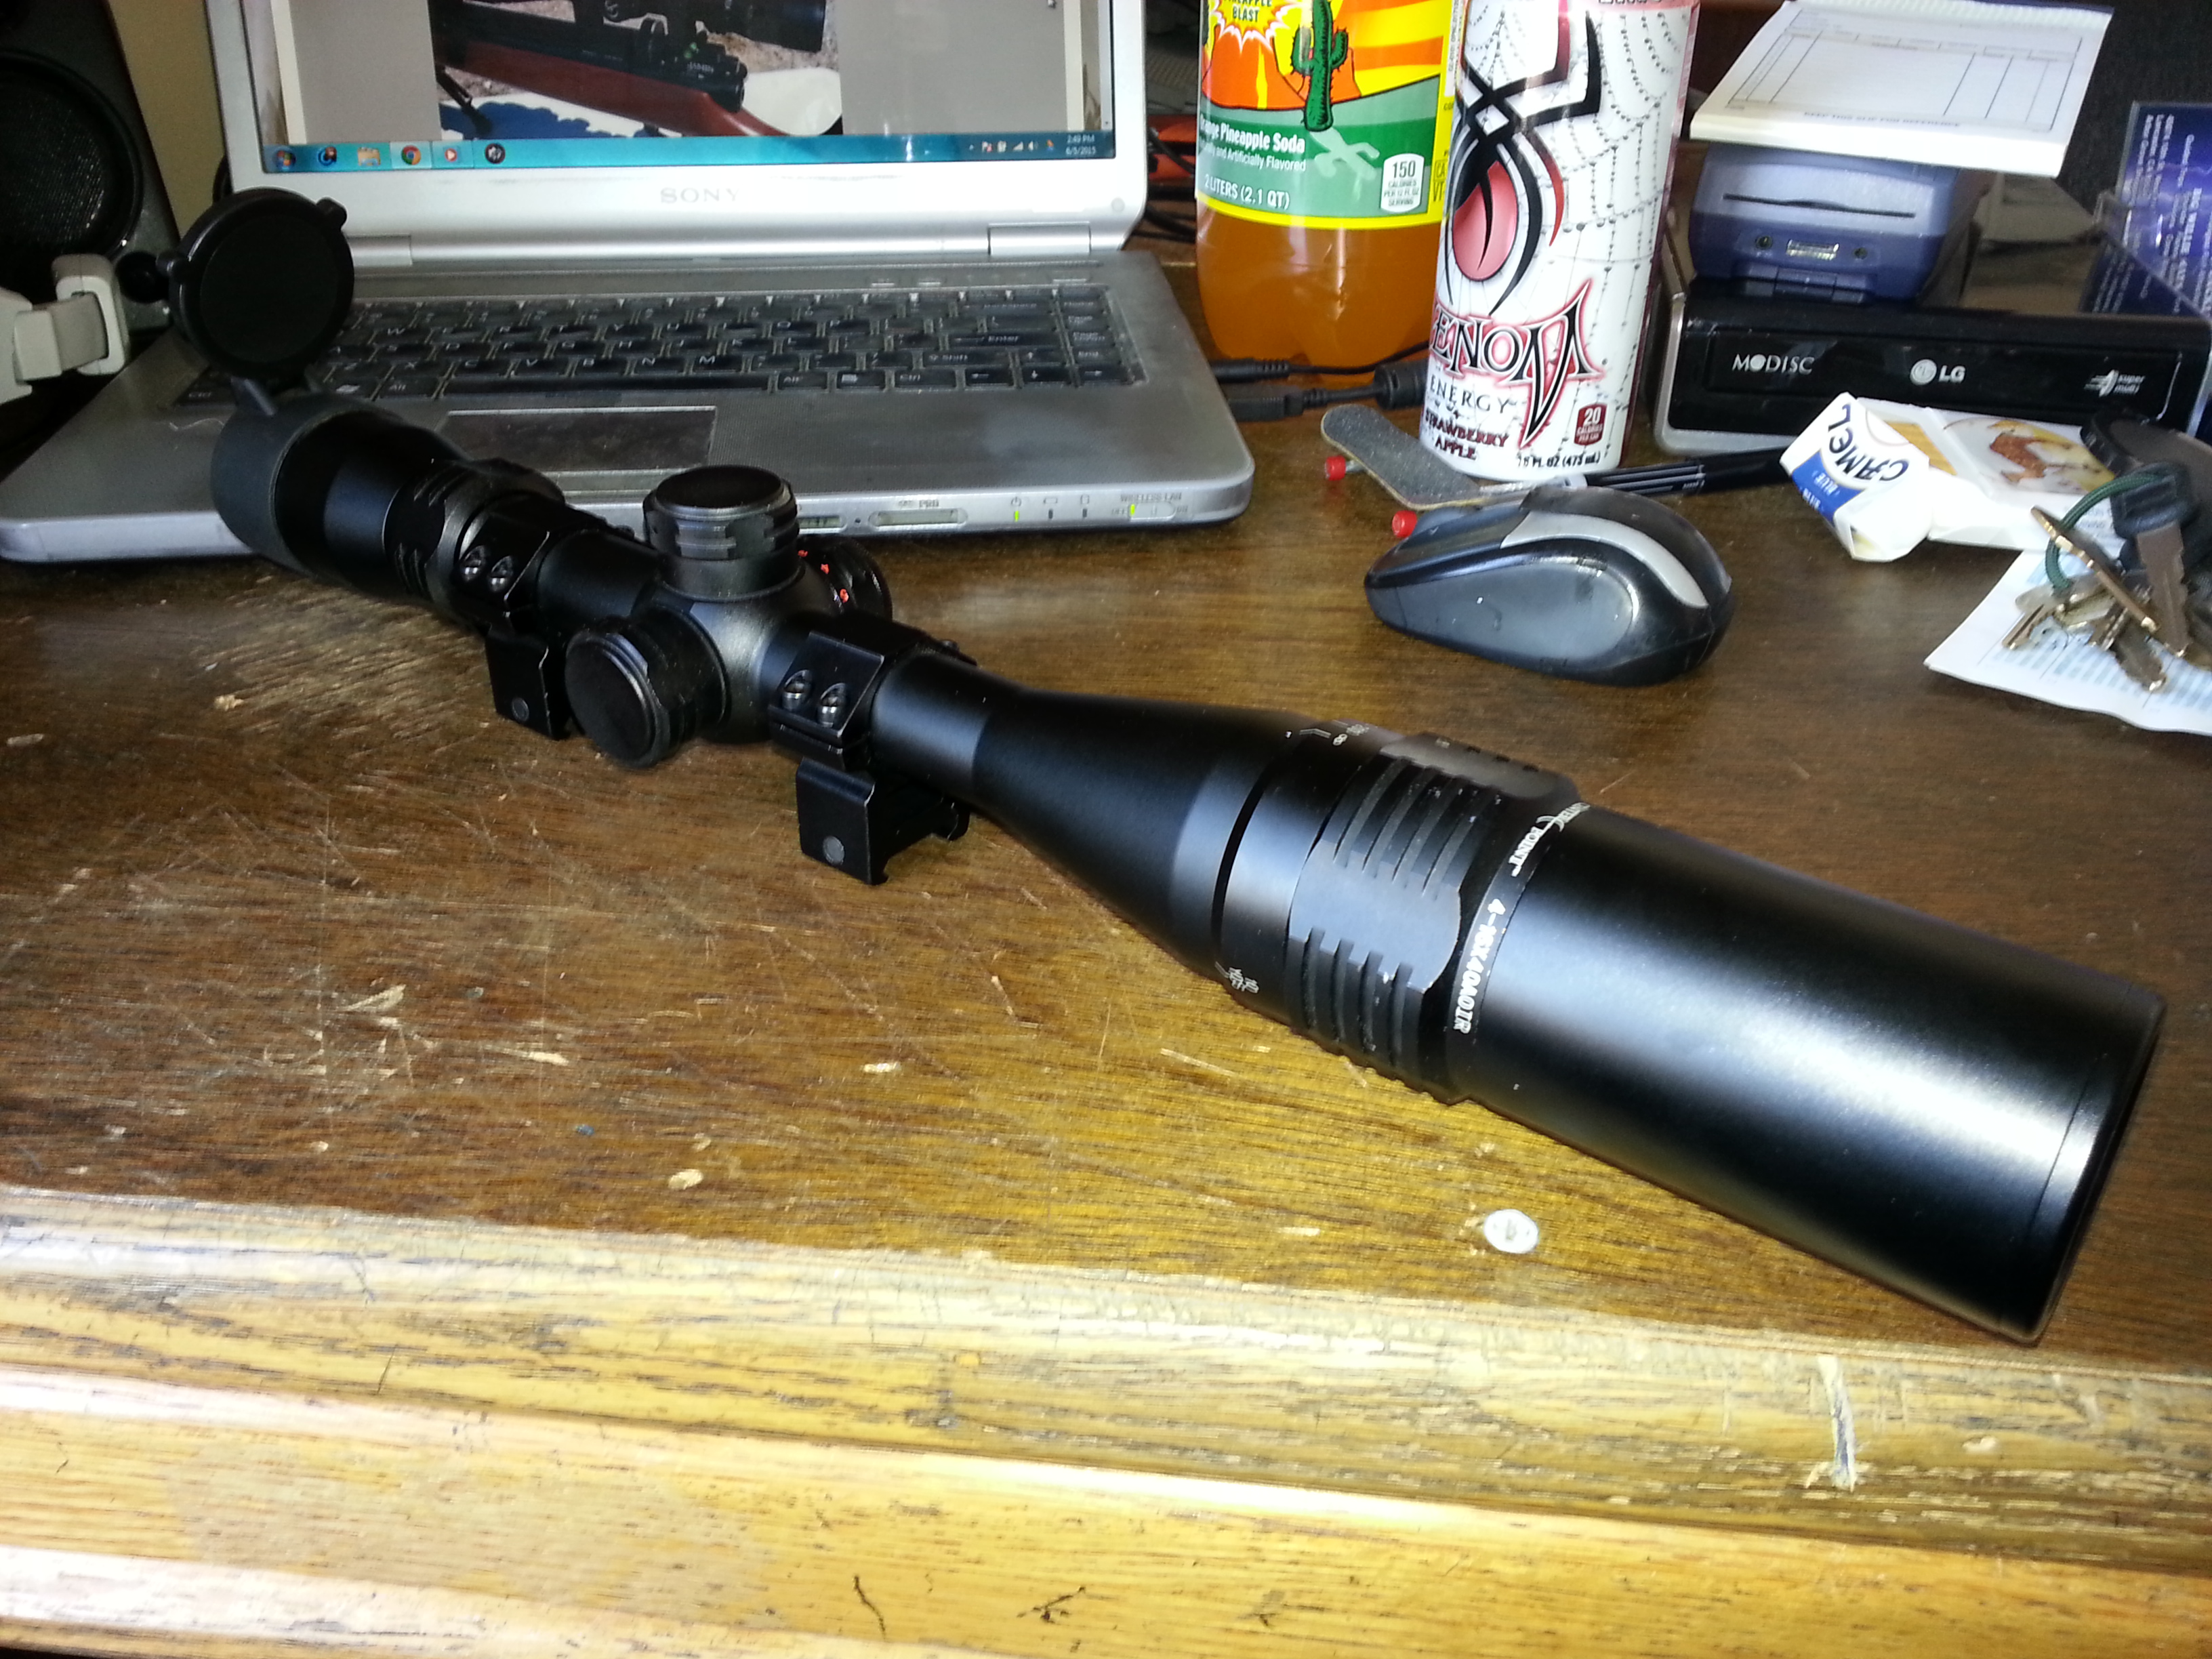 i have a centerpoint scope and bought a sunshade or scope shade for it off ebay. i didnt know if it would fit but i just got it today and it fits like a glove...on ebay its listed as  ''tactical aluminum 40mm rifle sunshade for many rifle scopes length 76mm 3" it runs about 6-7 dollars.measurements are 48mmx76mmx49mm